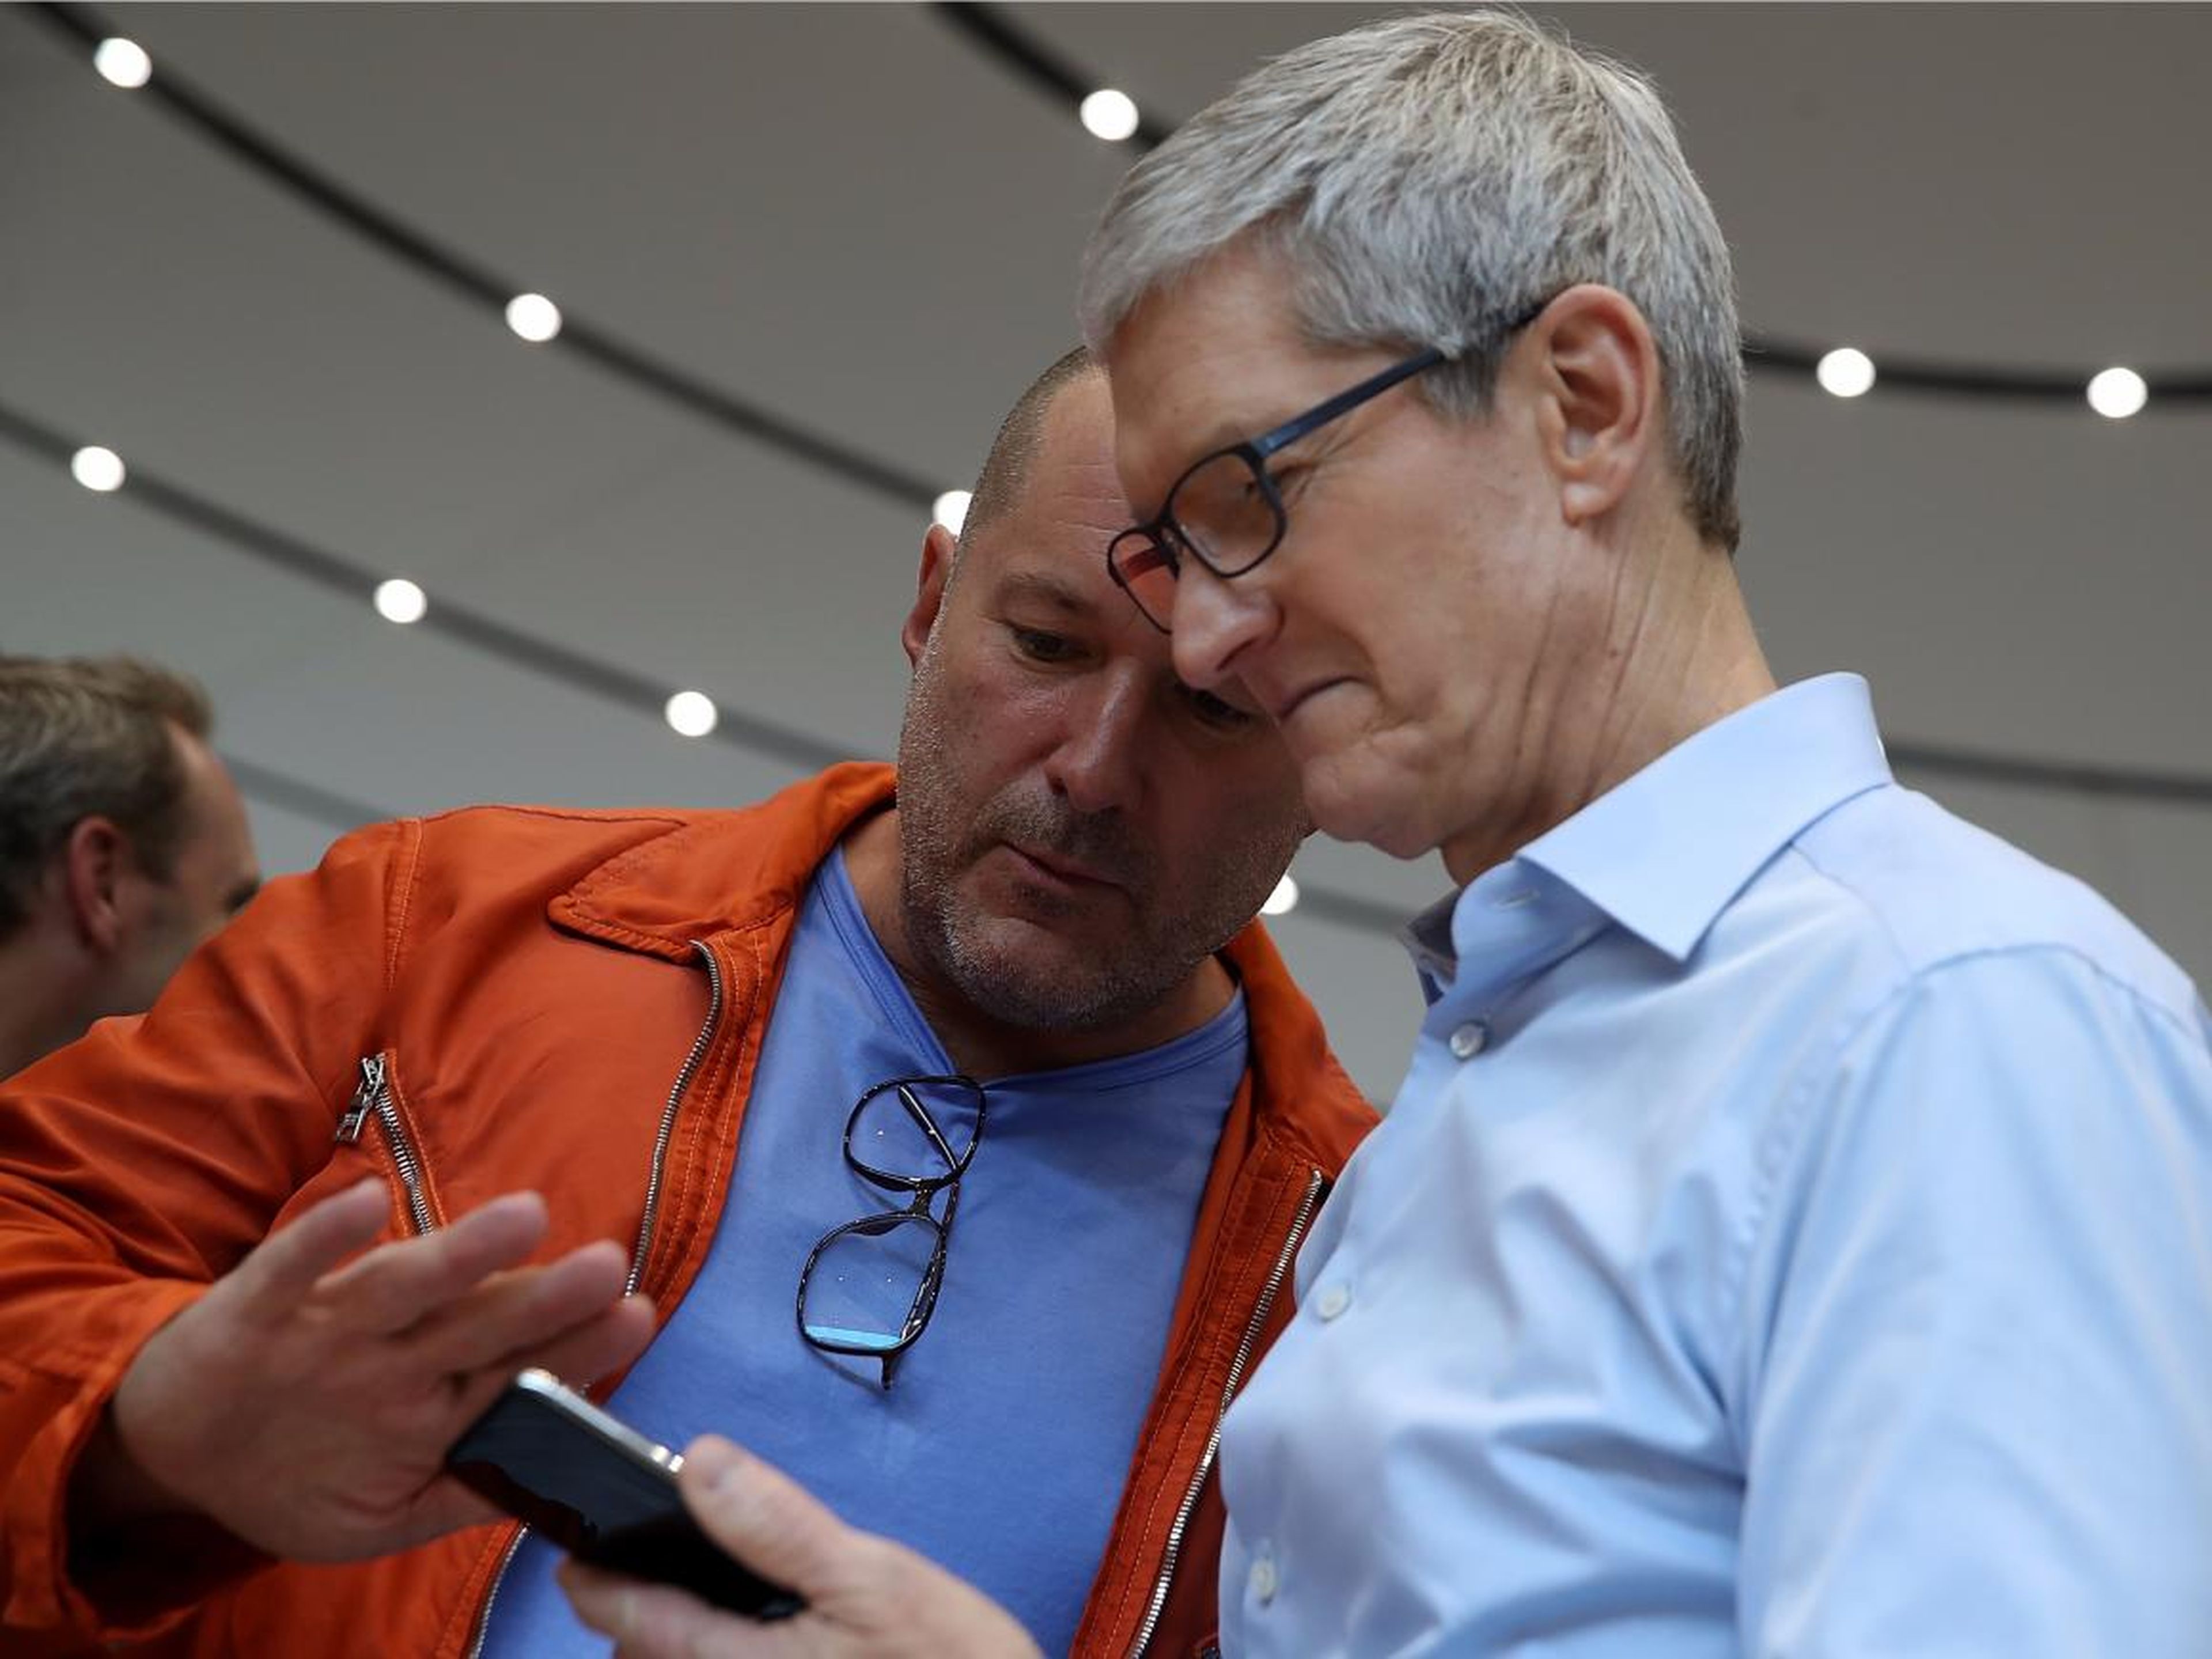 Johnny Ive and Tim Cook